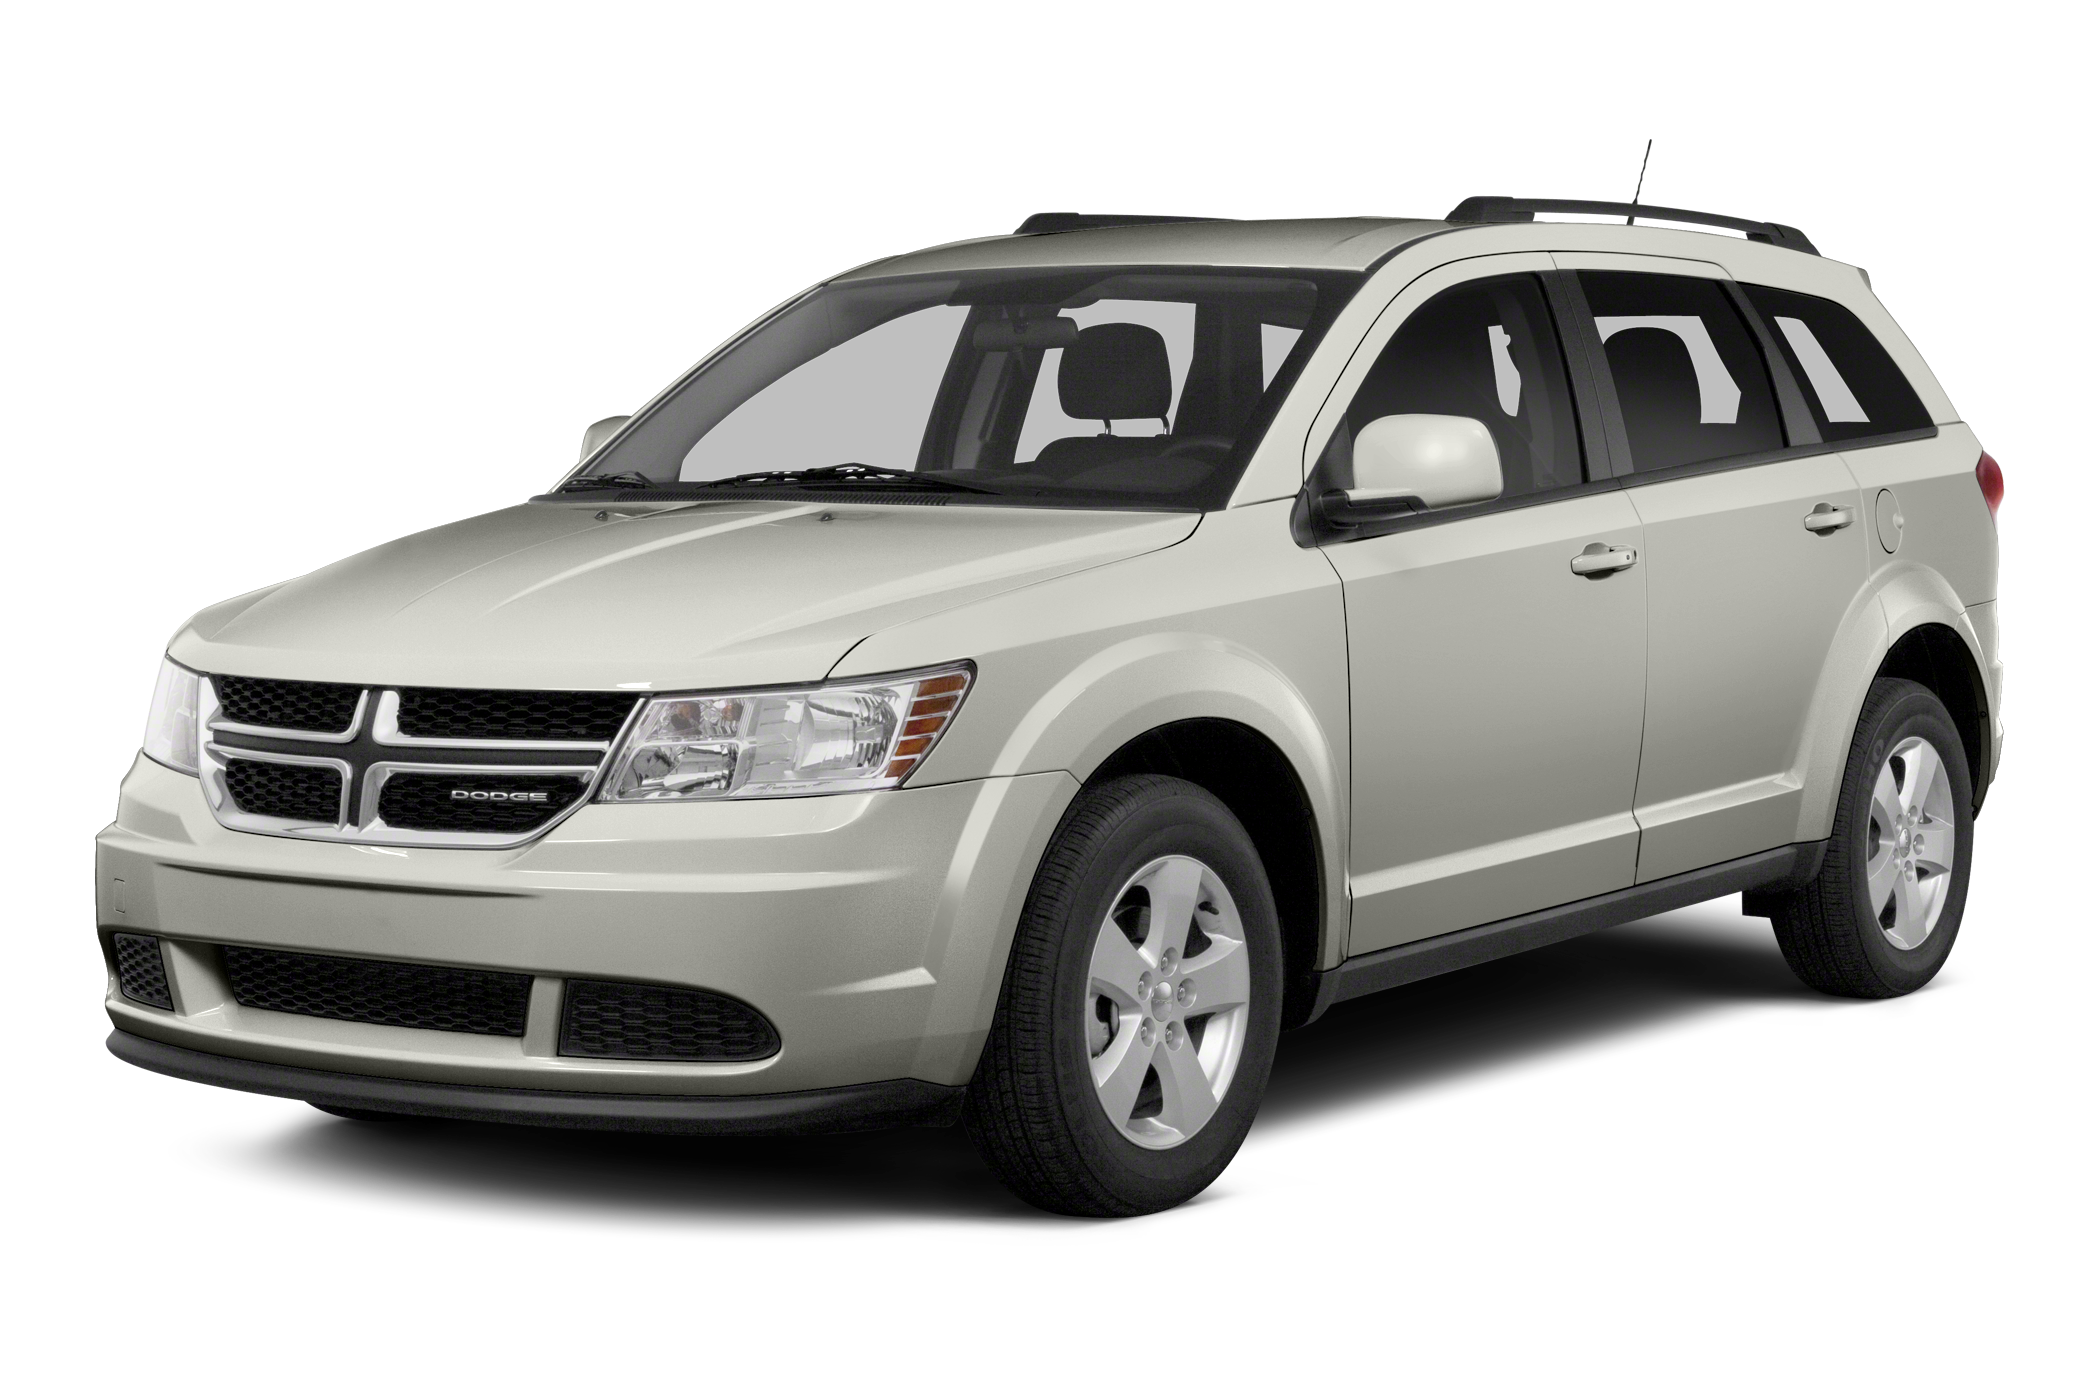 Side view of the 2013 Dodge Journey